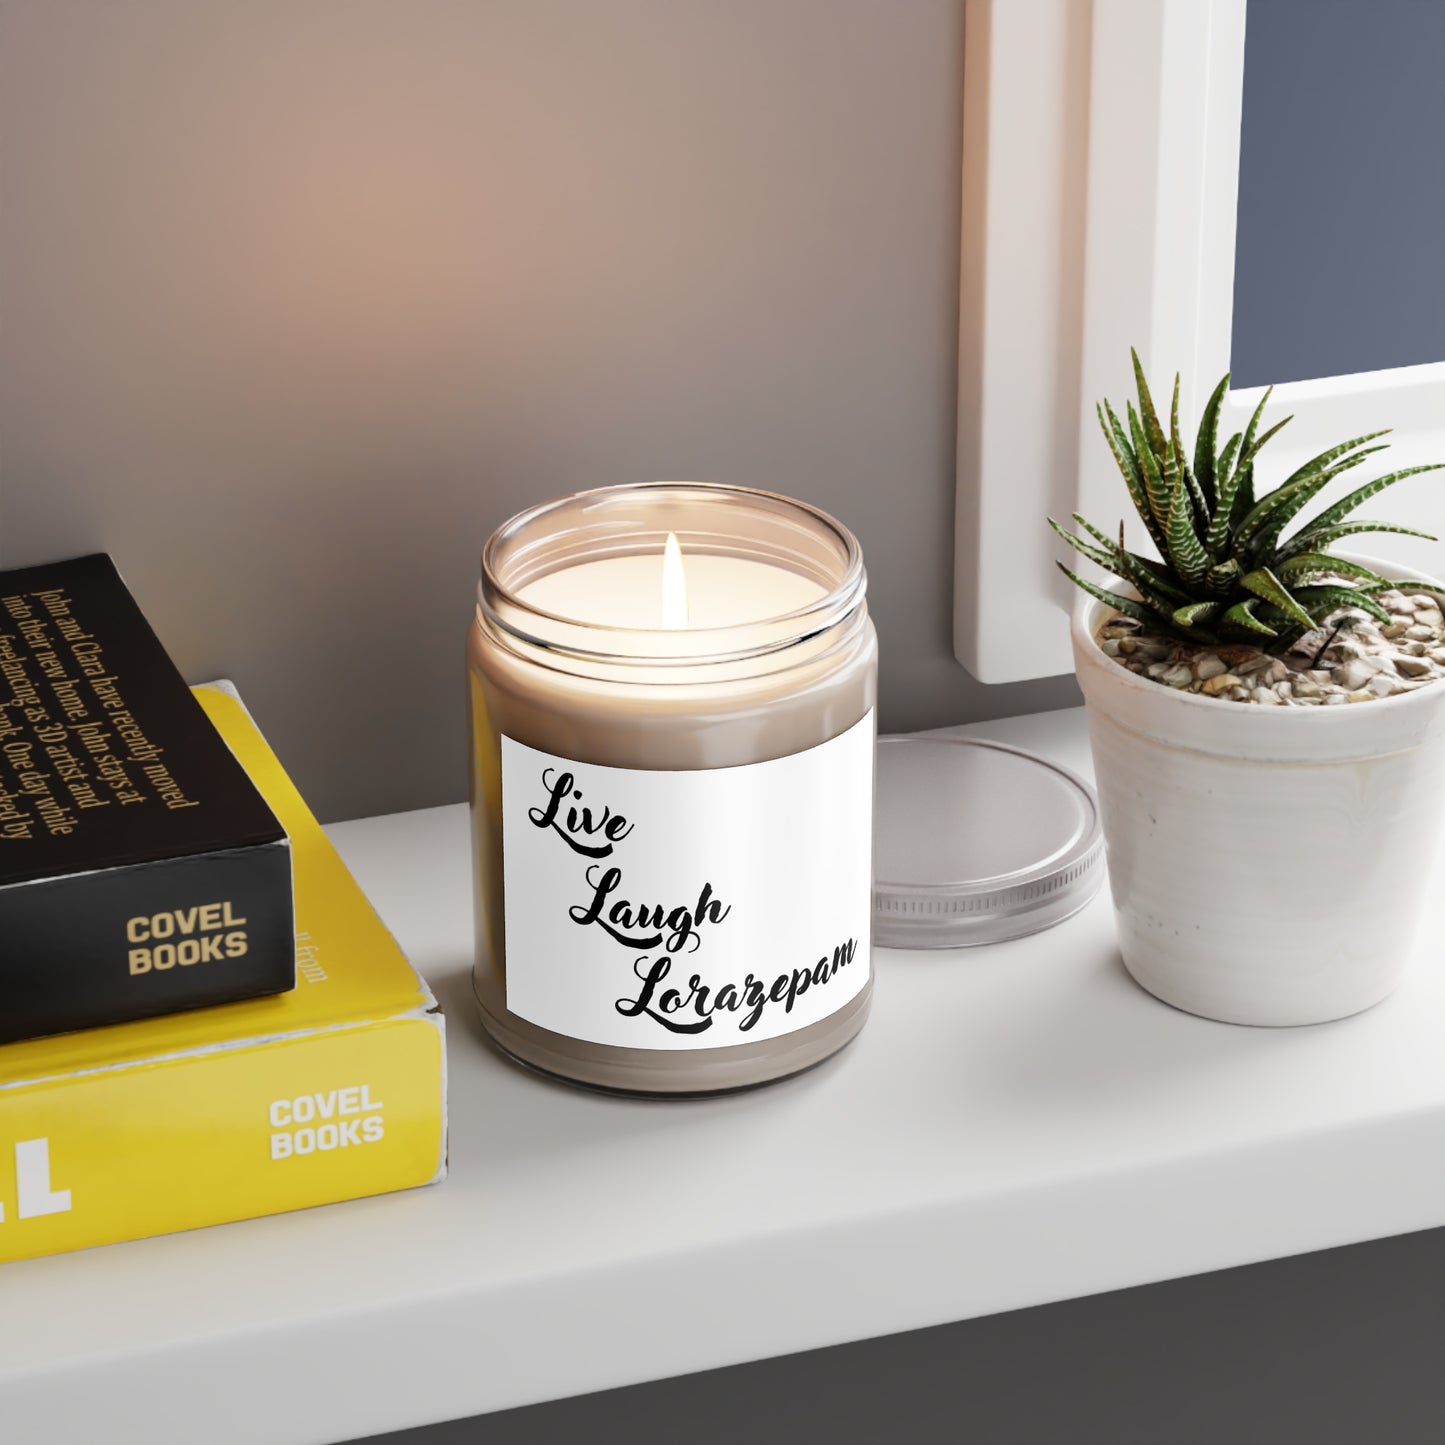 Live, Laugh, Lorazepam - Scented Candle